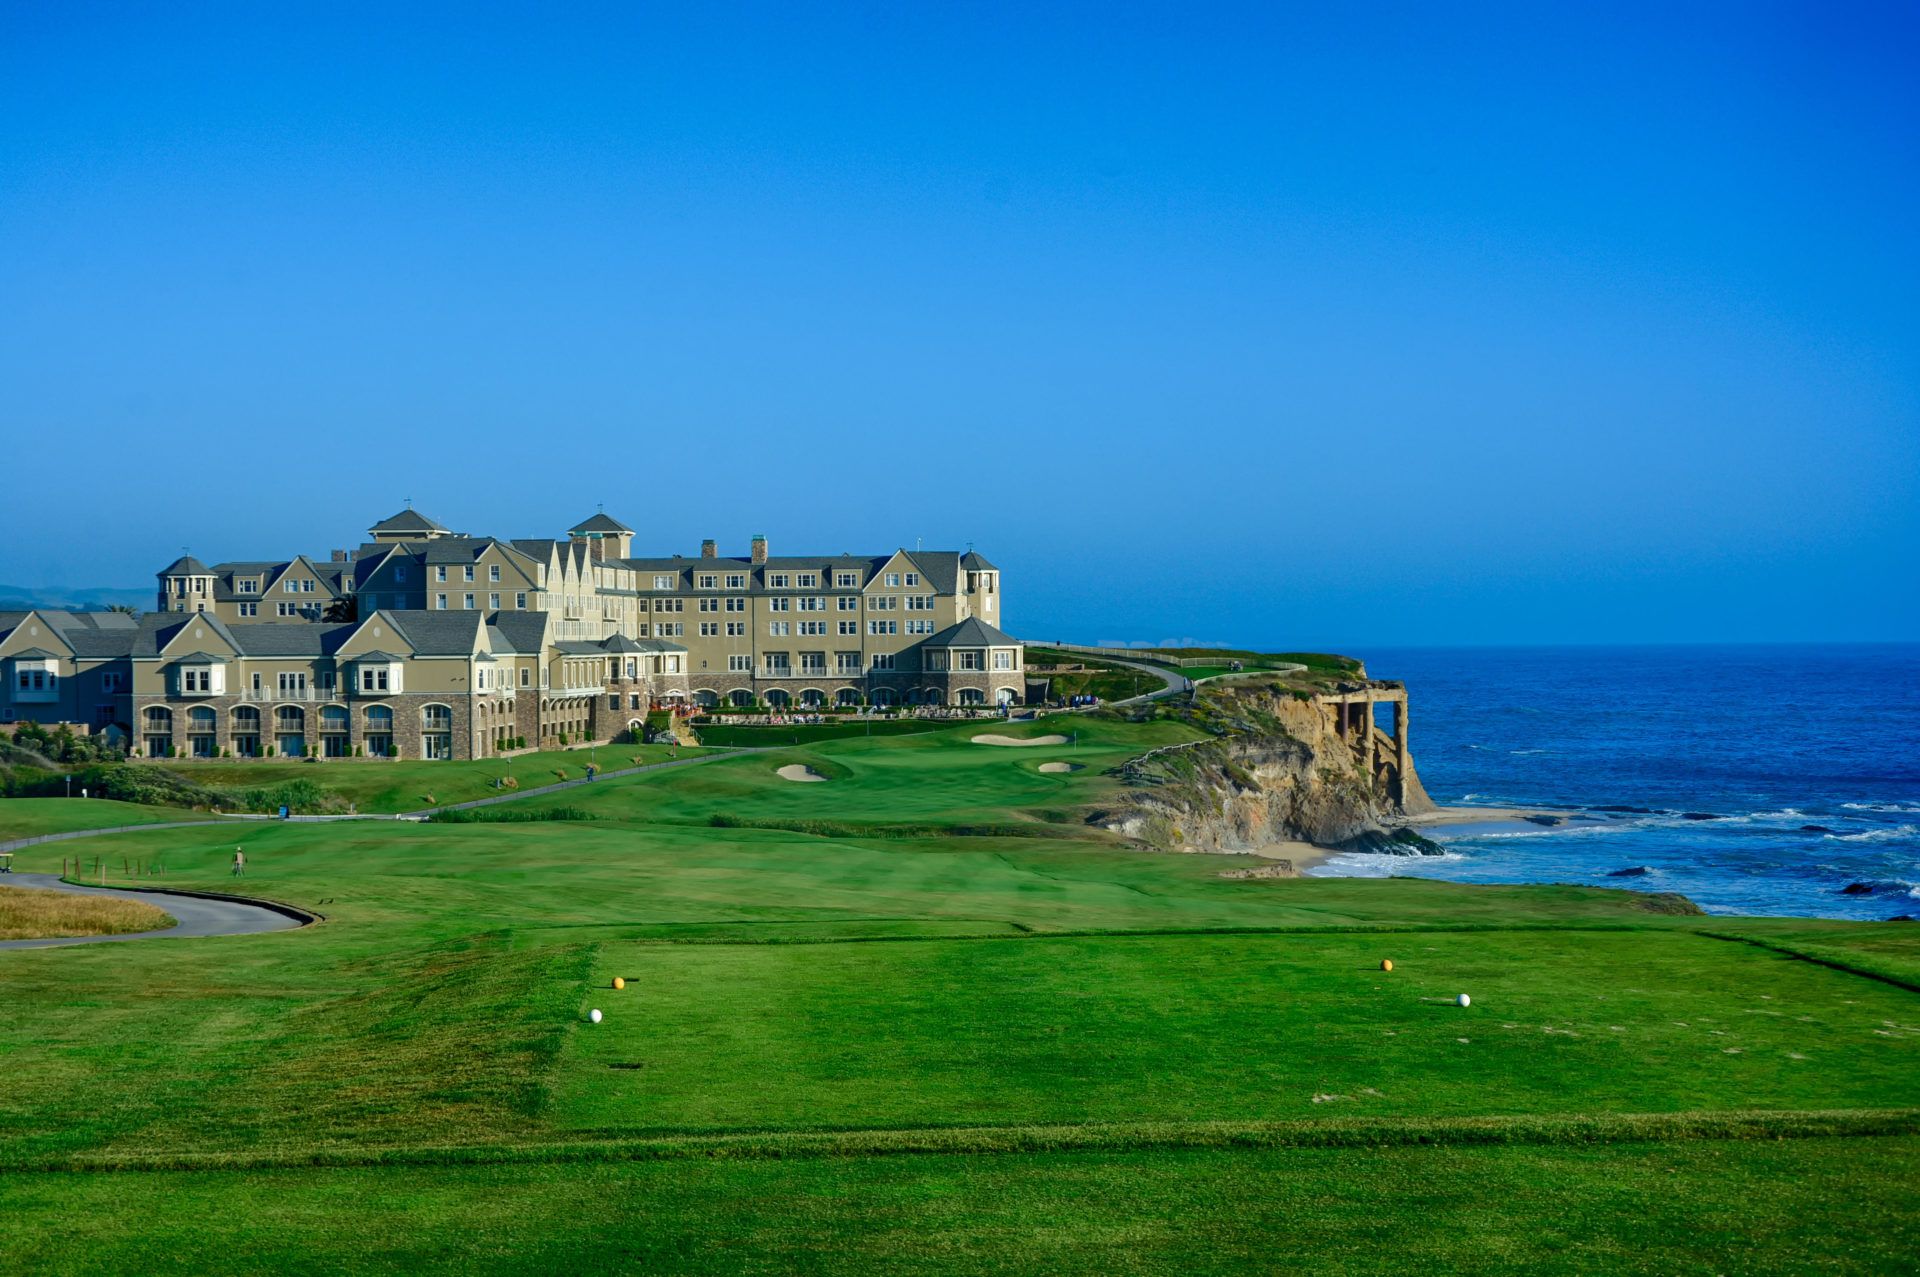 Ritz Carlton Half Moon Bay Review: Is the Hotel as Good as the Views?